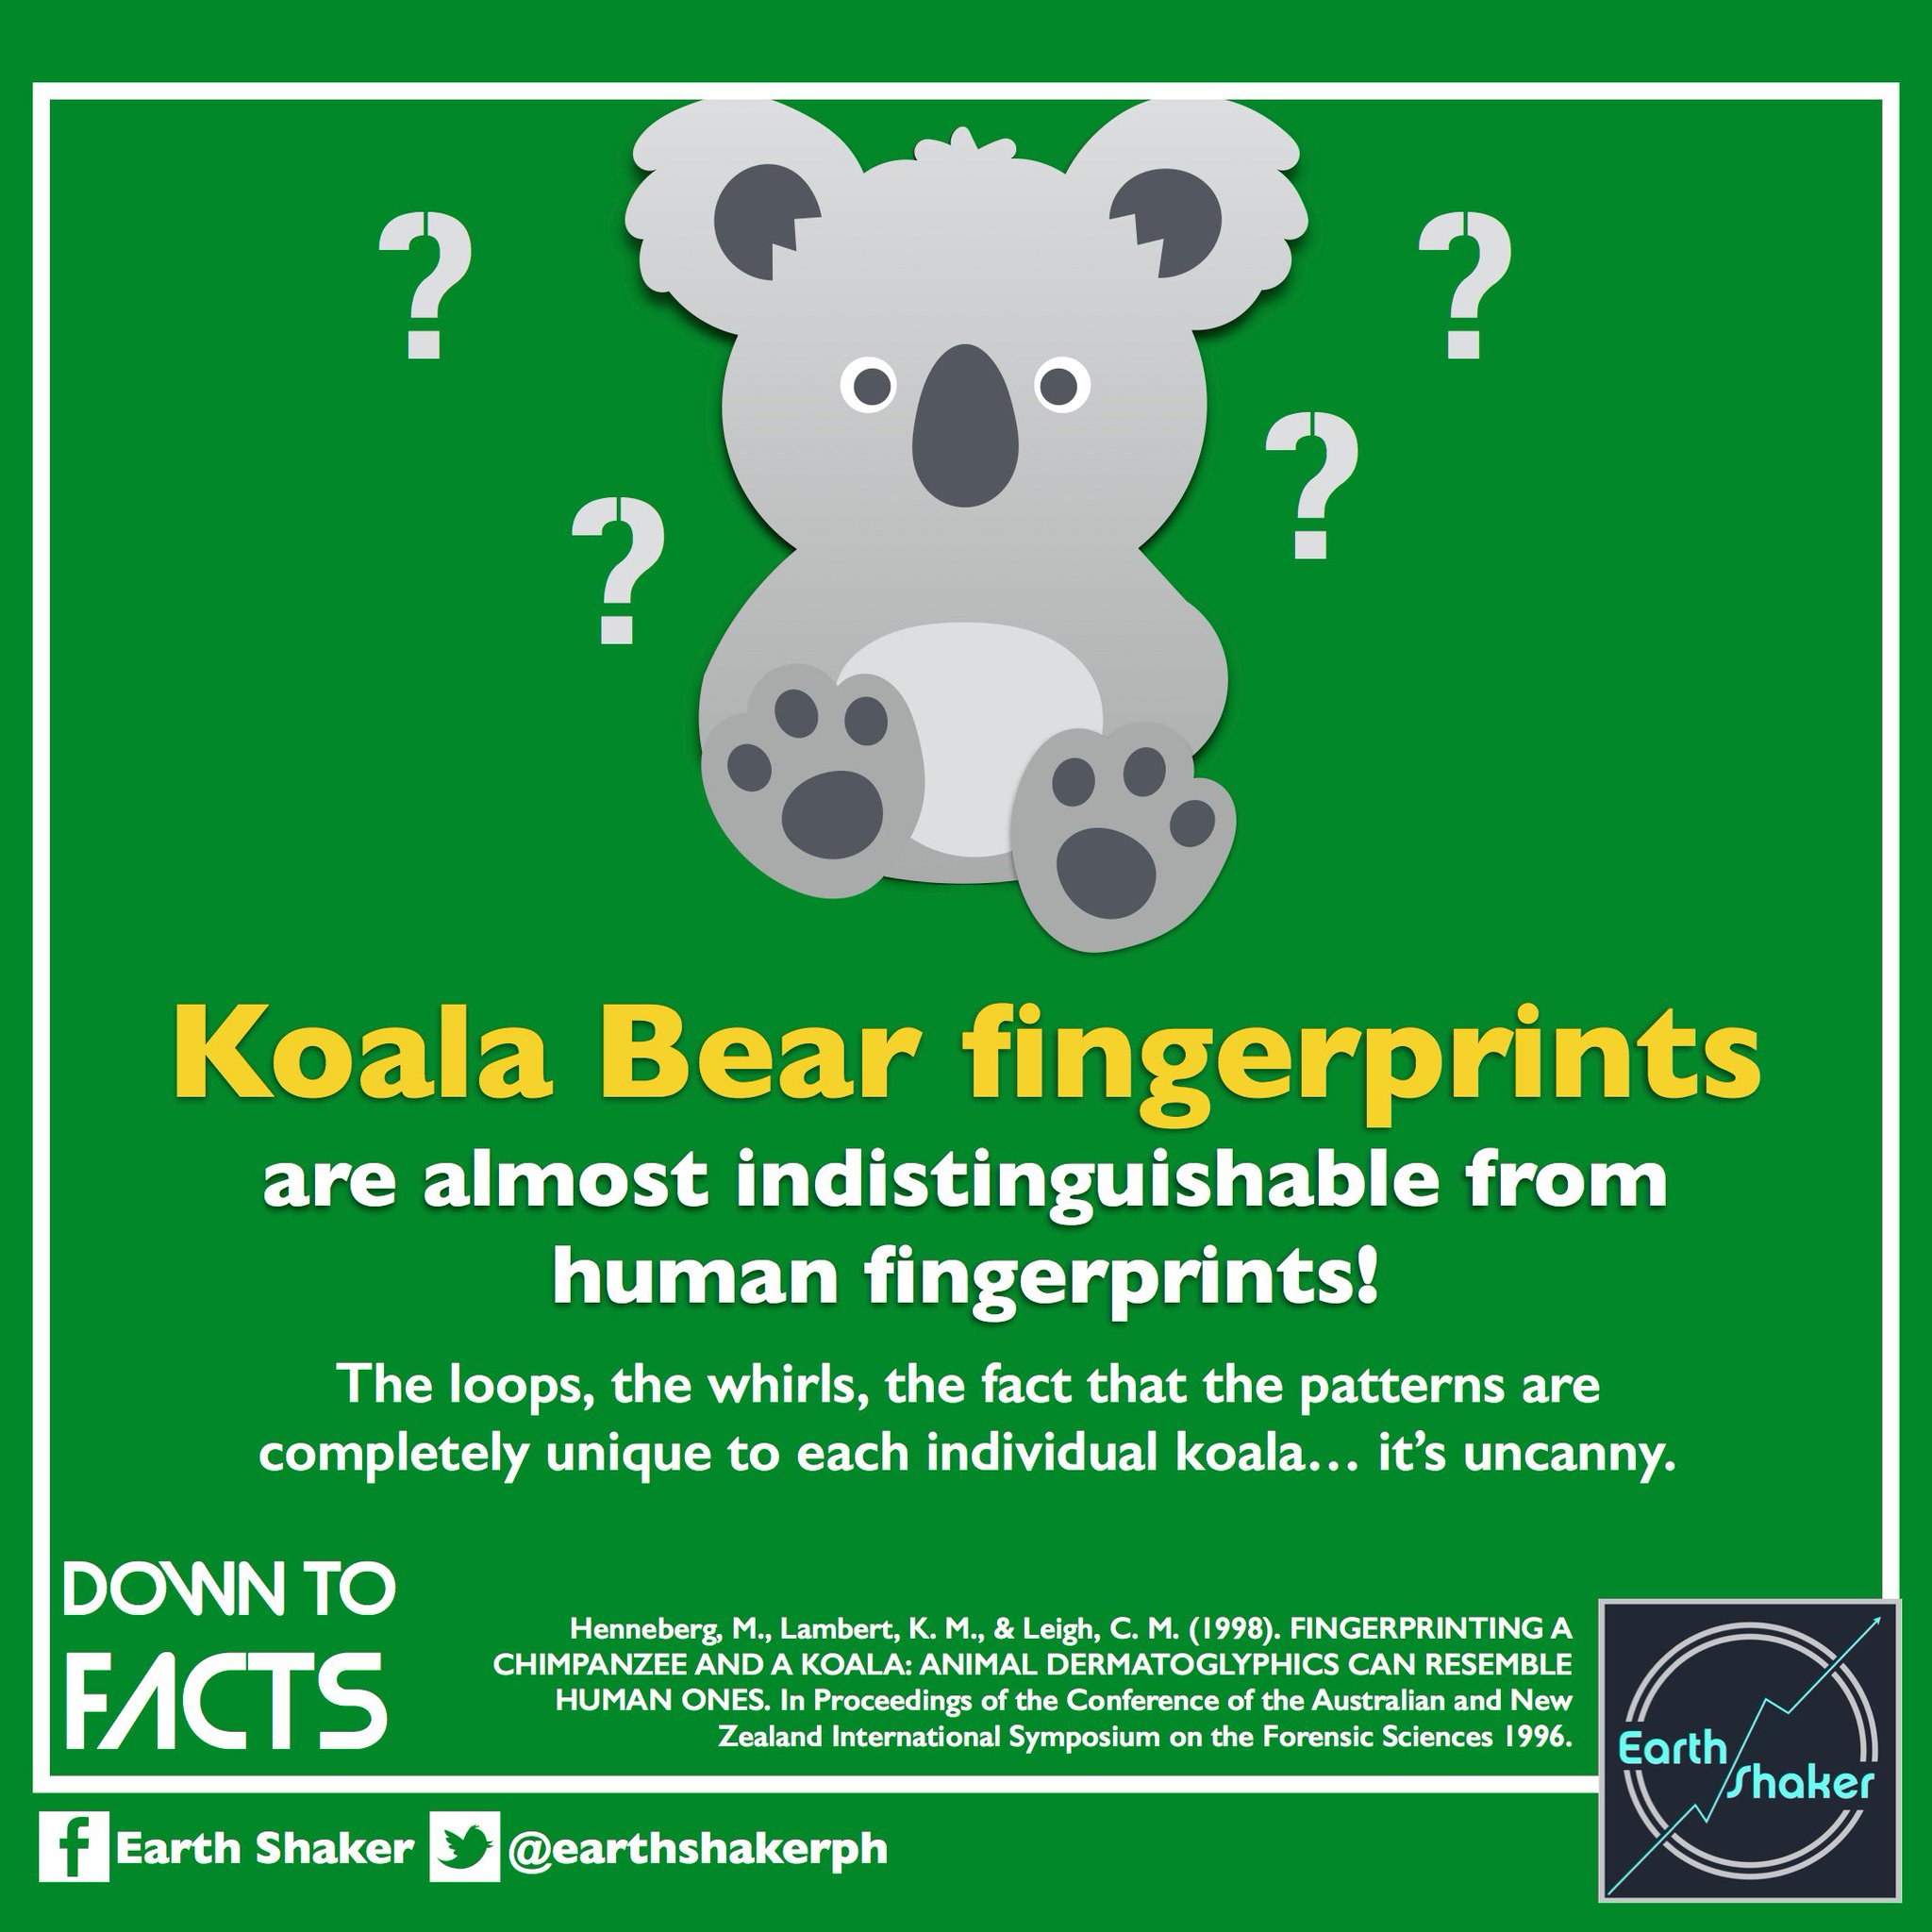 Koala Fingerprints Are Almost Indistinguishable From A Human's